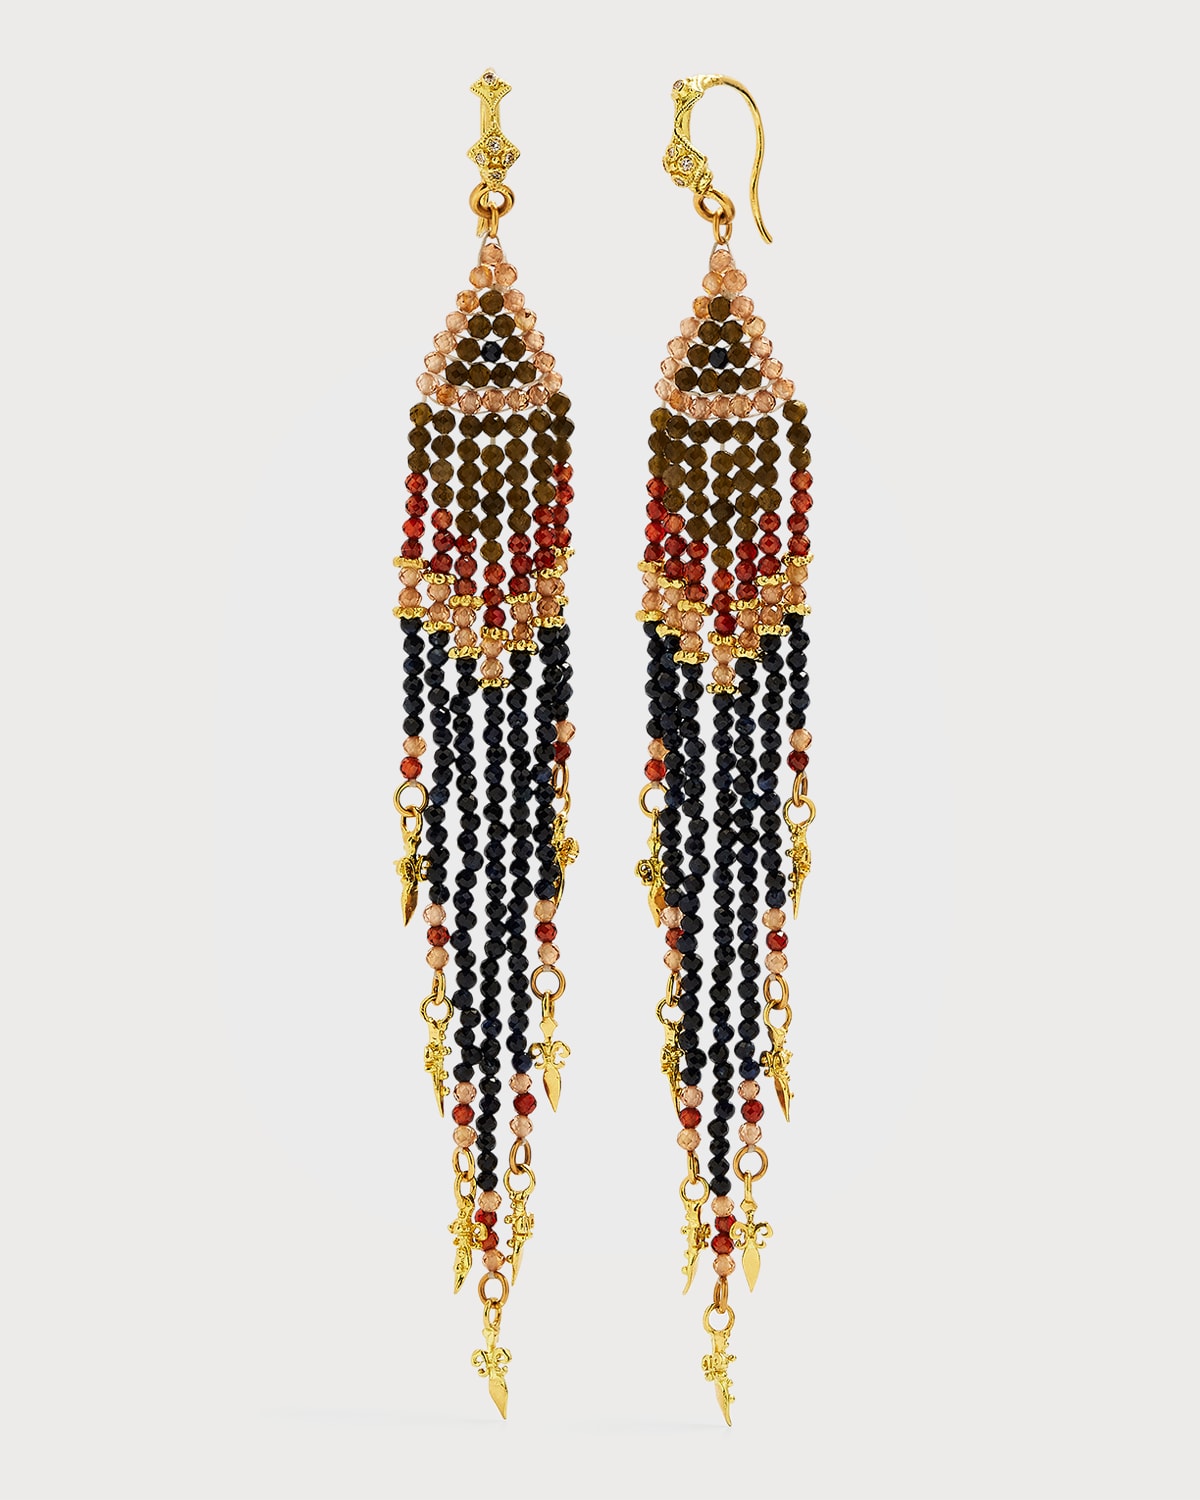 18K Yellow Gold Beaded Feather Earrings with Shaded Sapphires, Garnet, Labradorite and Brown Zircon